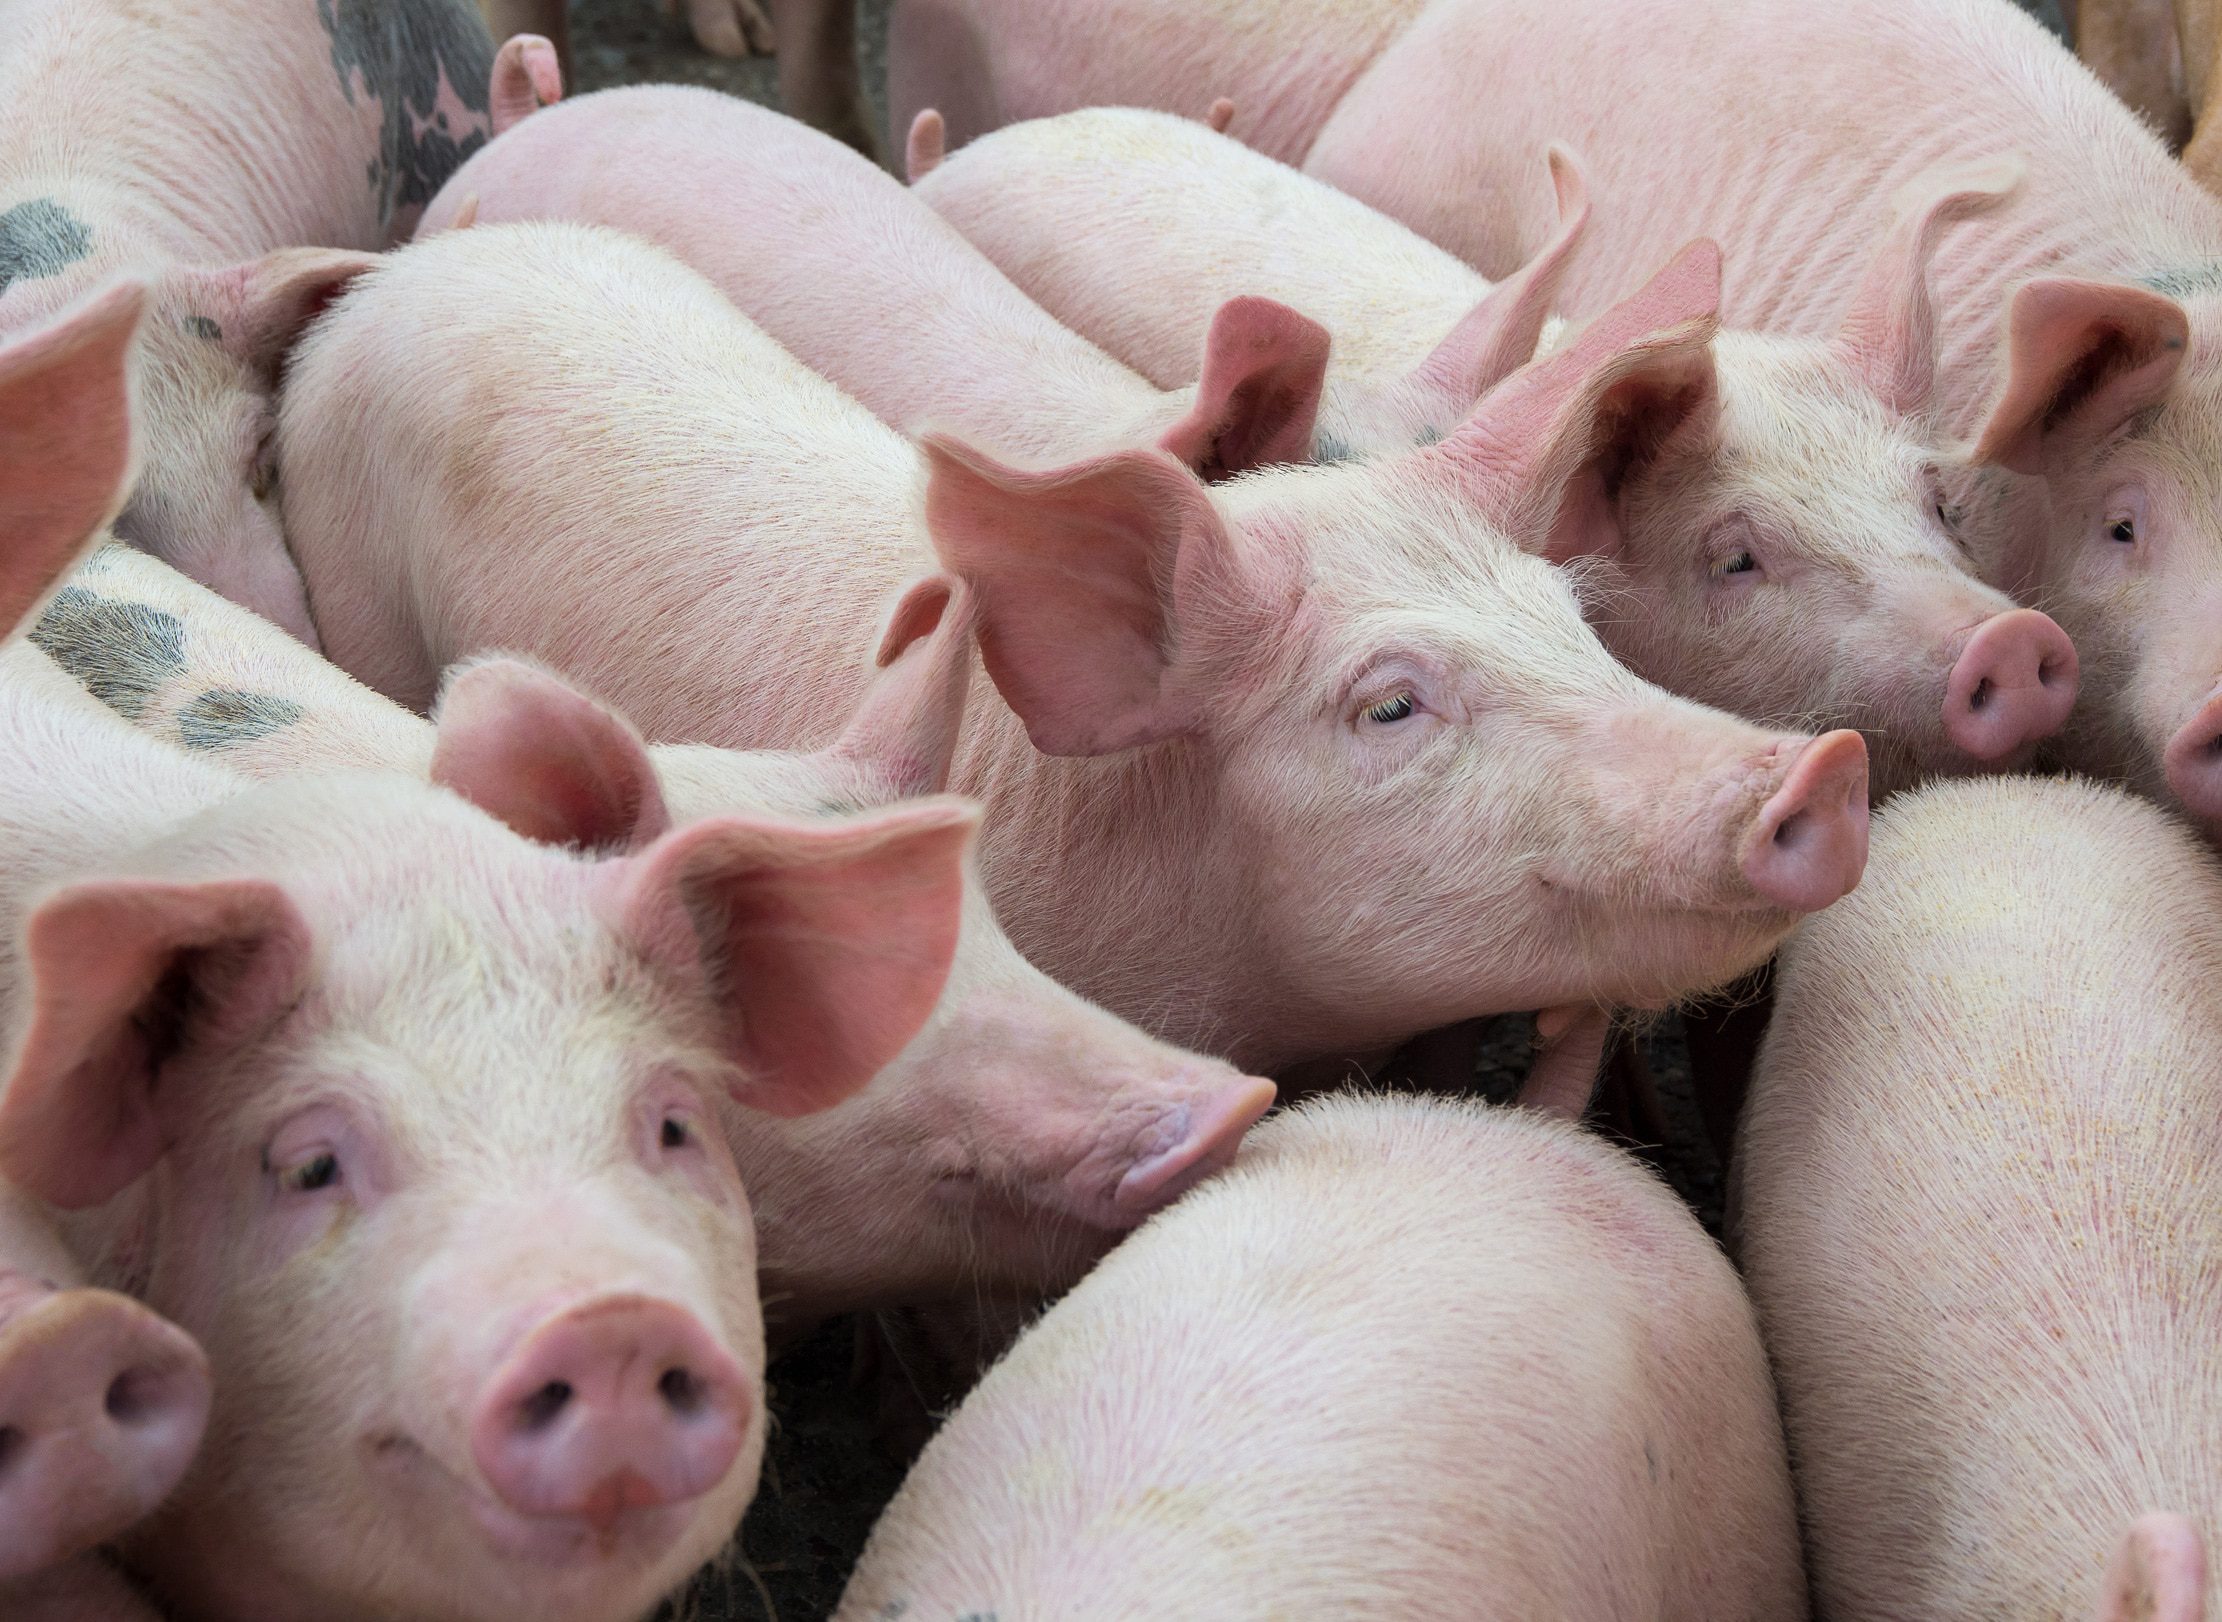 A group of sows